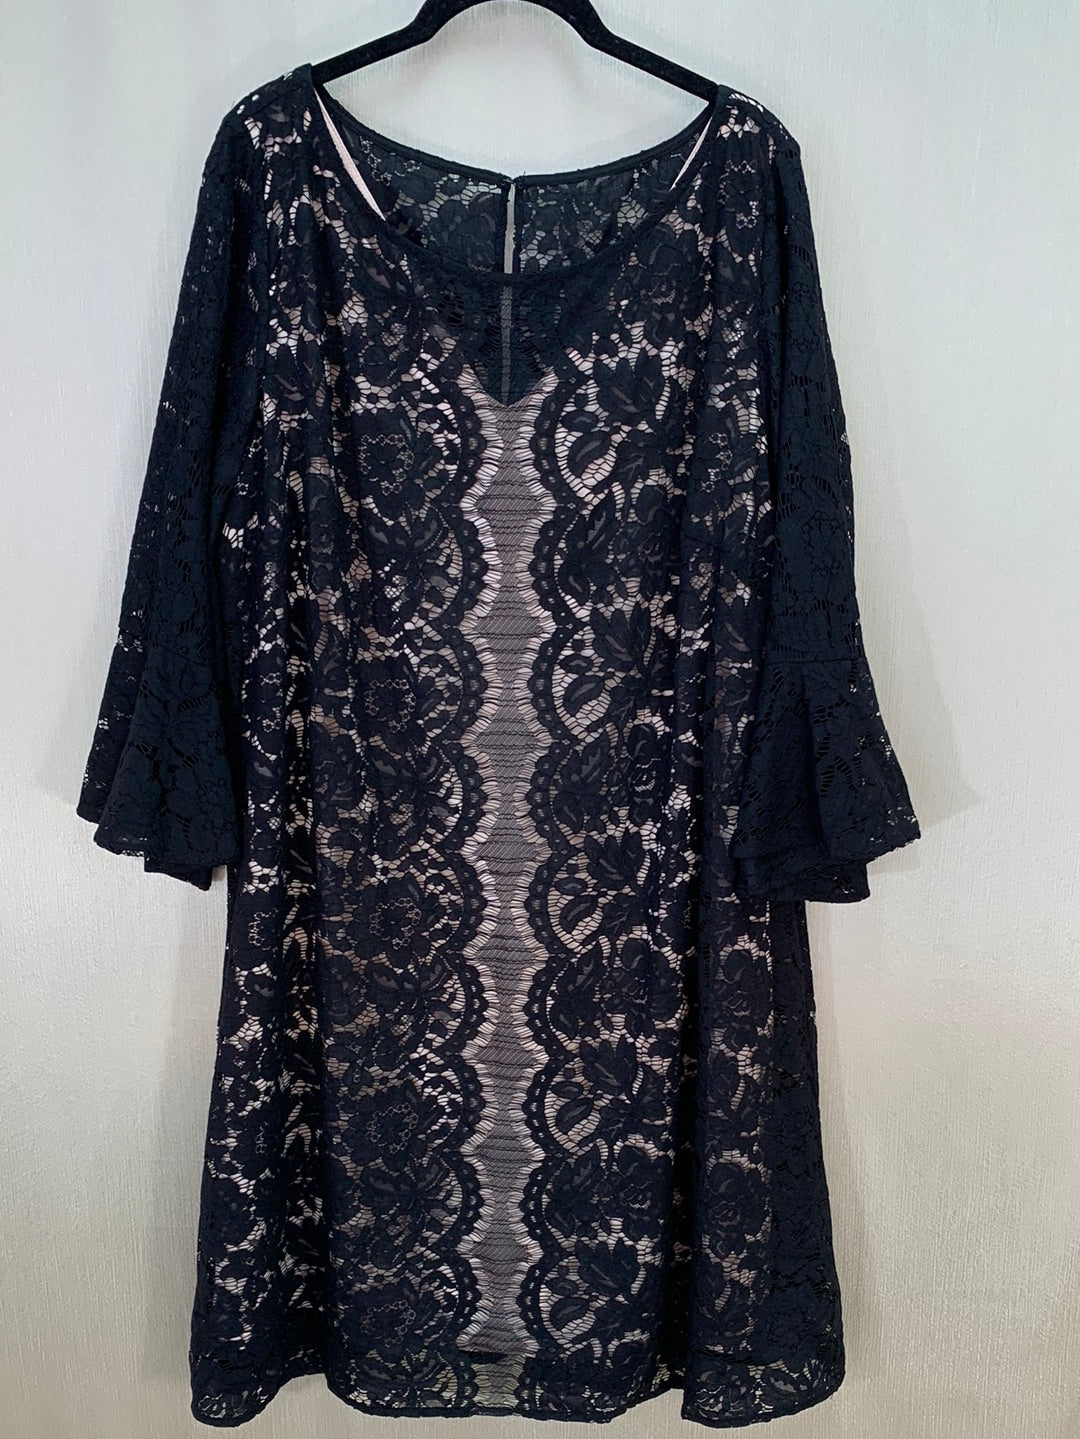 NWT - LANE BRYANT black nude Lace Overlay Lined Bell Sleeve Shift Dress - 18